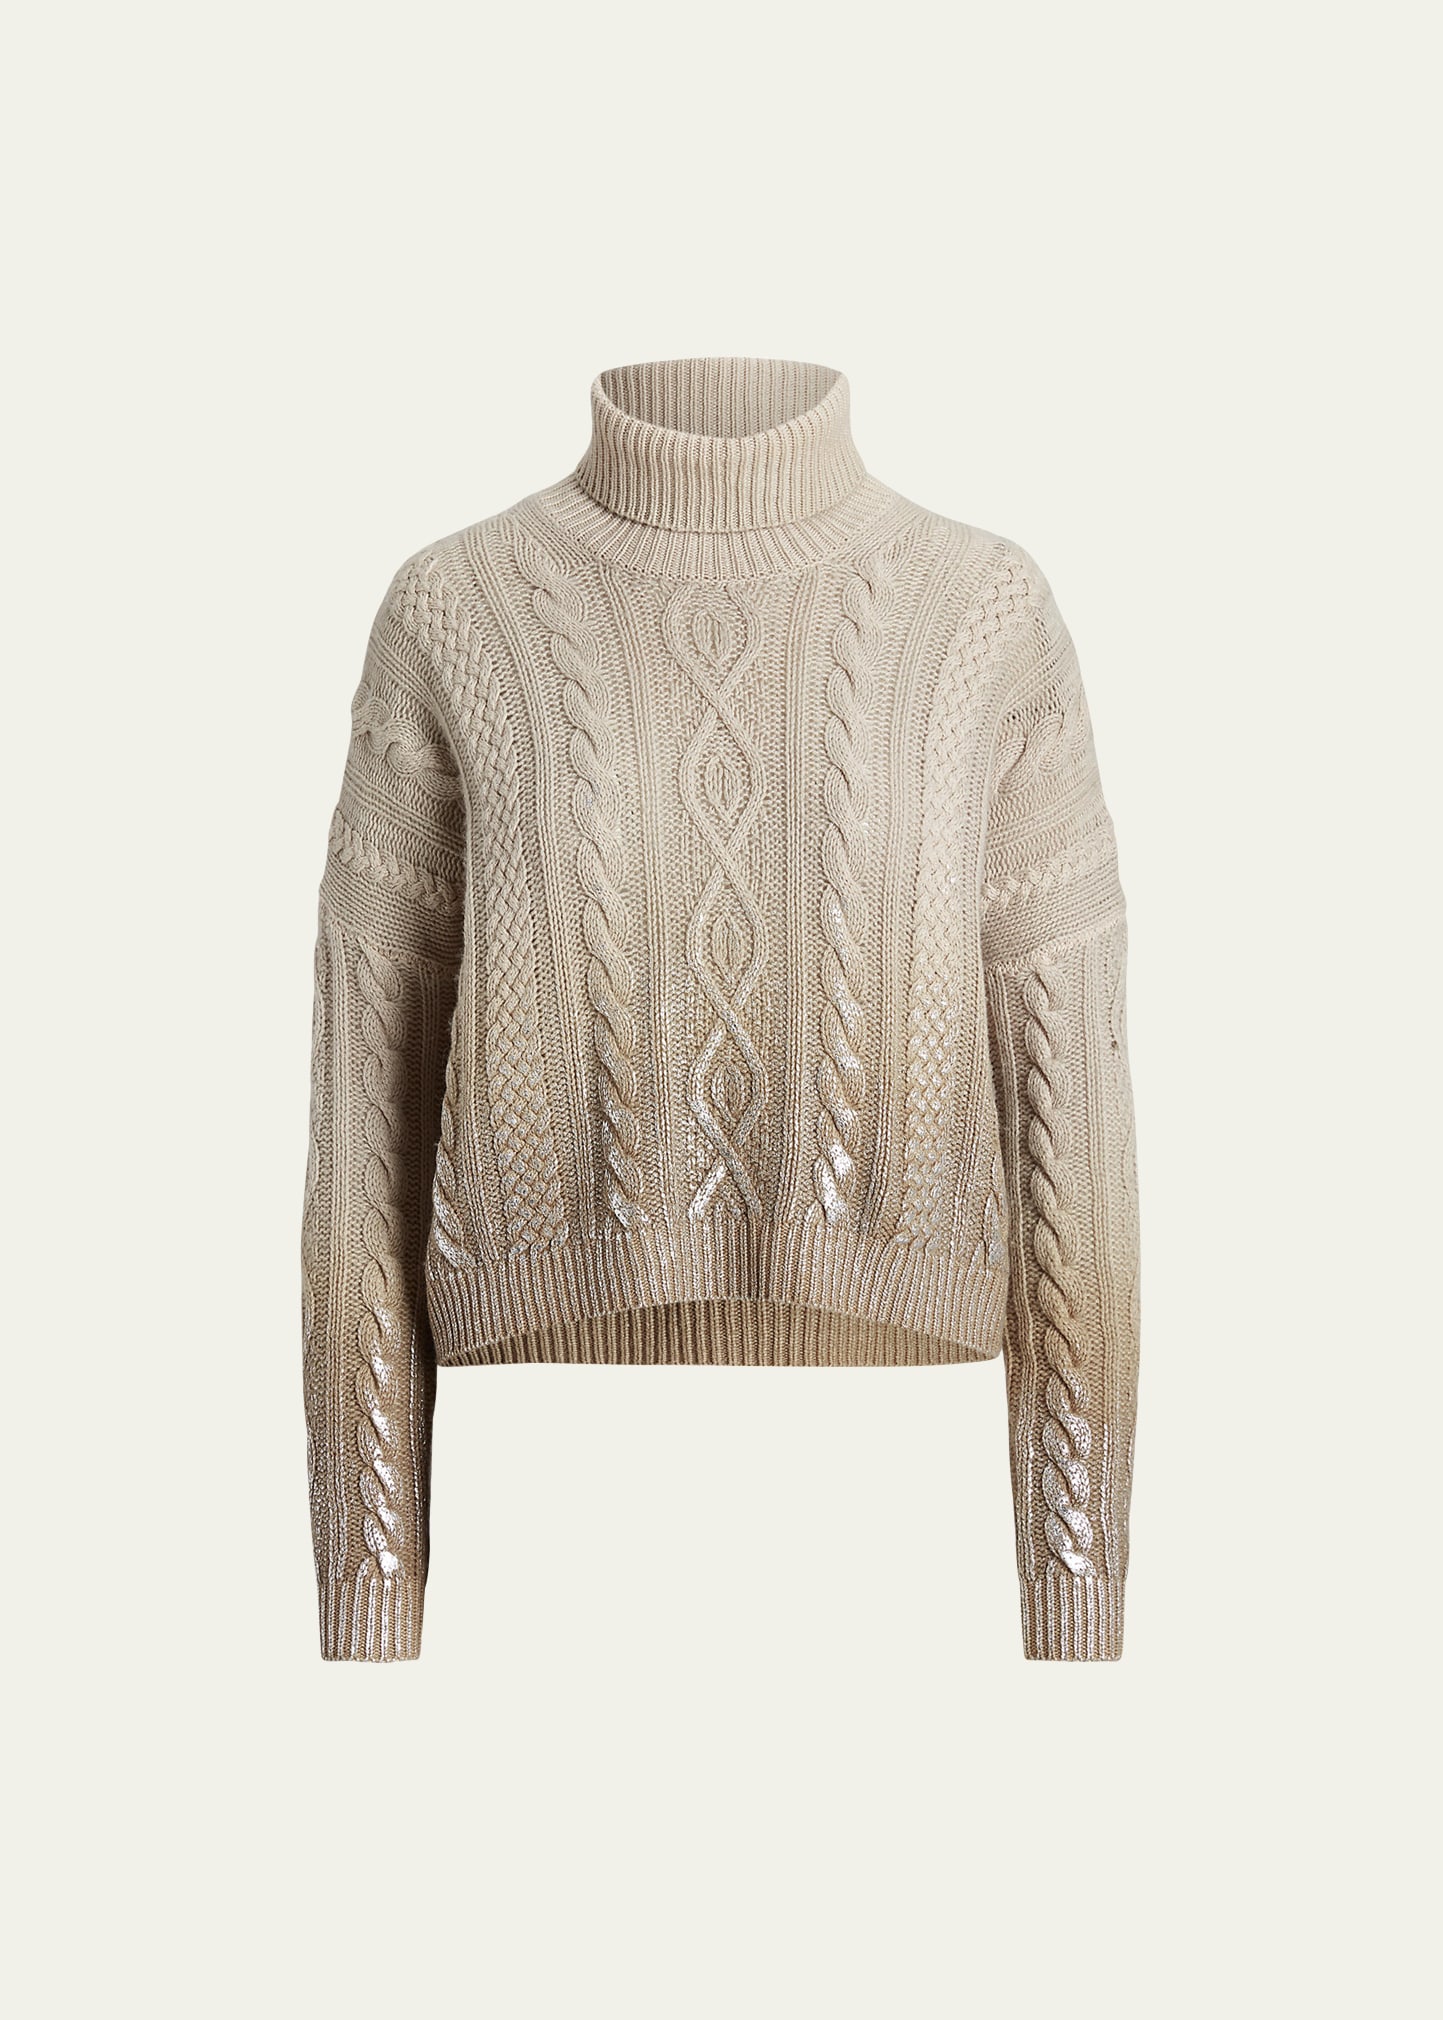 Cashmere Turtleneck Sweater with Artisanal Handpainted Detail